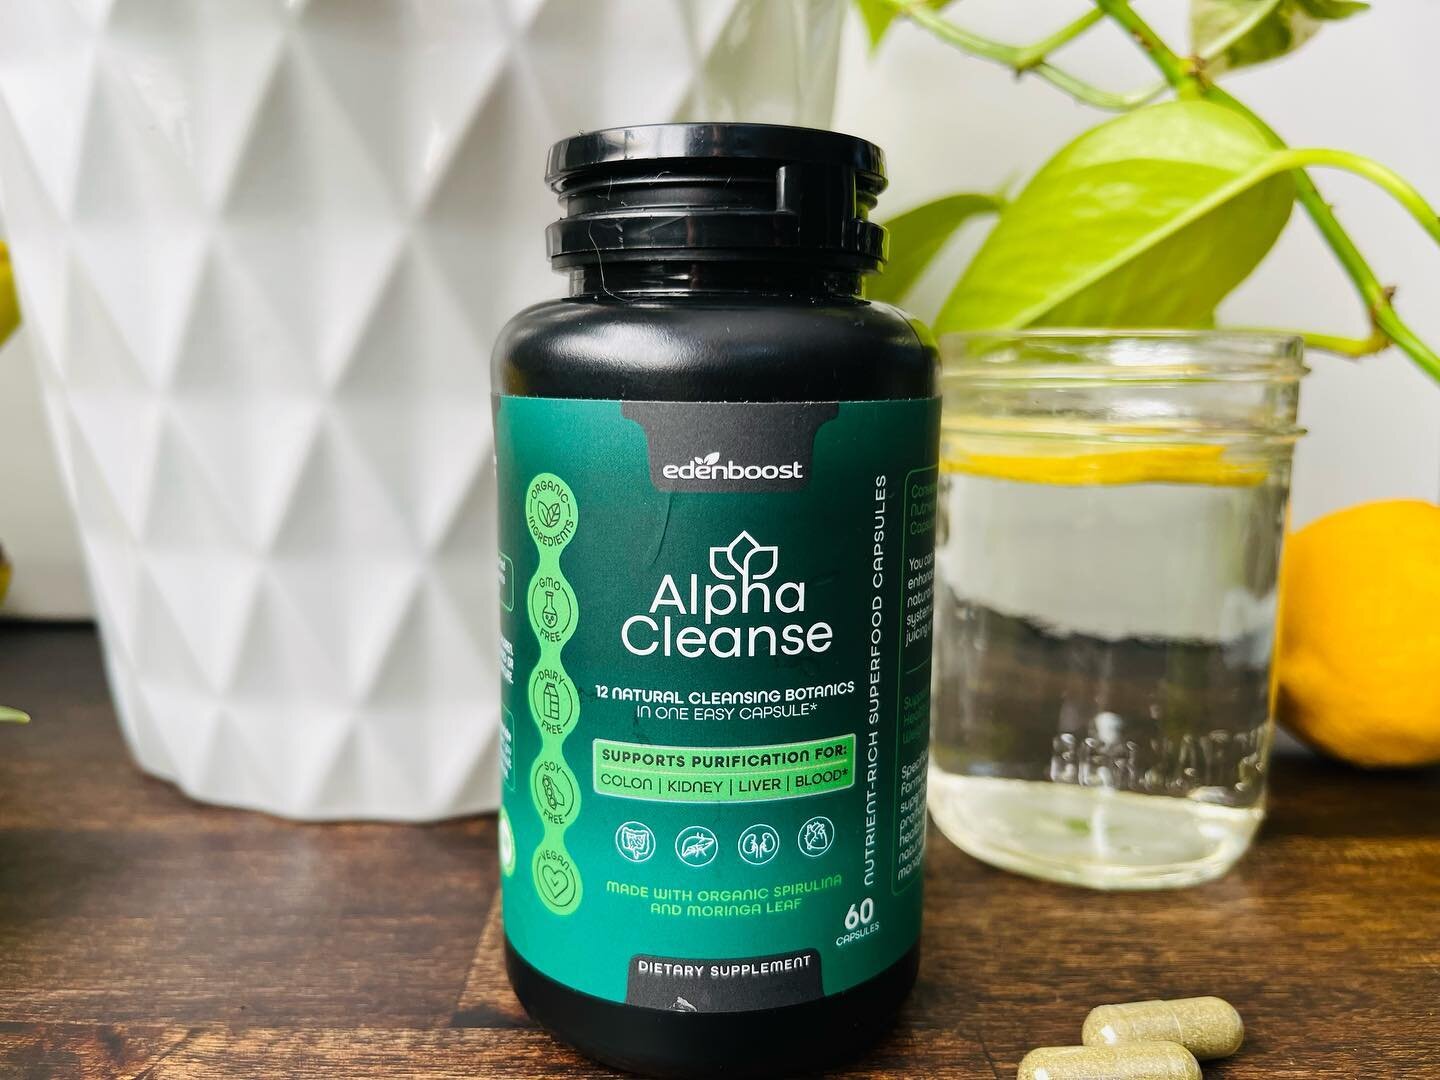 This has been one of my regular supplements lately and I&rsquo;m loving it! 

It contains 12 herbs that are great for cleansing and detox. 

Try it today for 10% off with the link below!

https://shop.edenboost.com/discount/Brook10?redirect=%2Fproduc